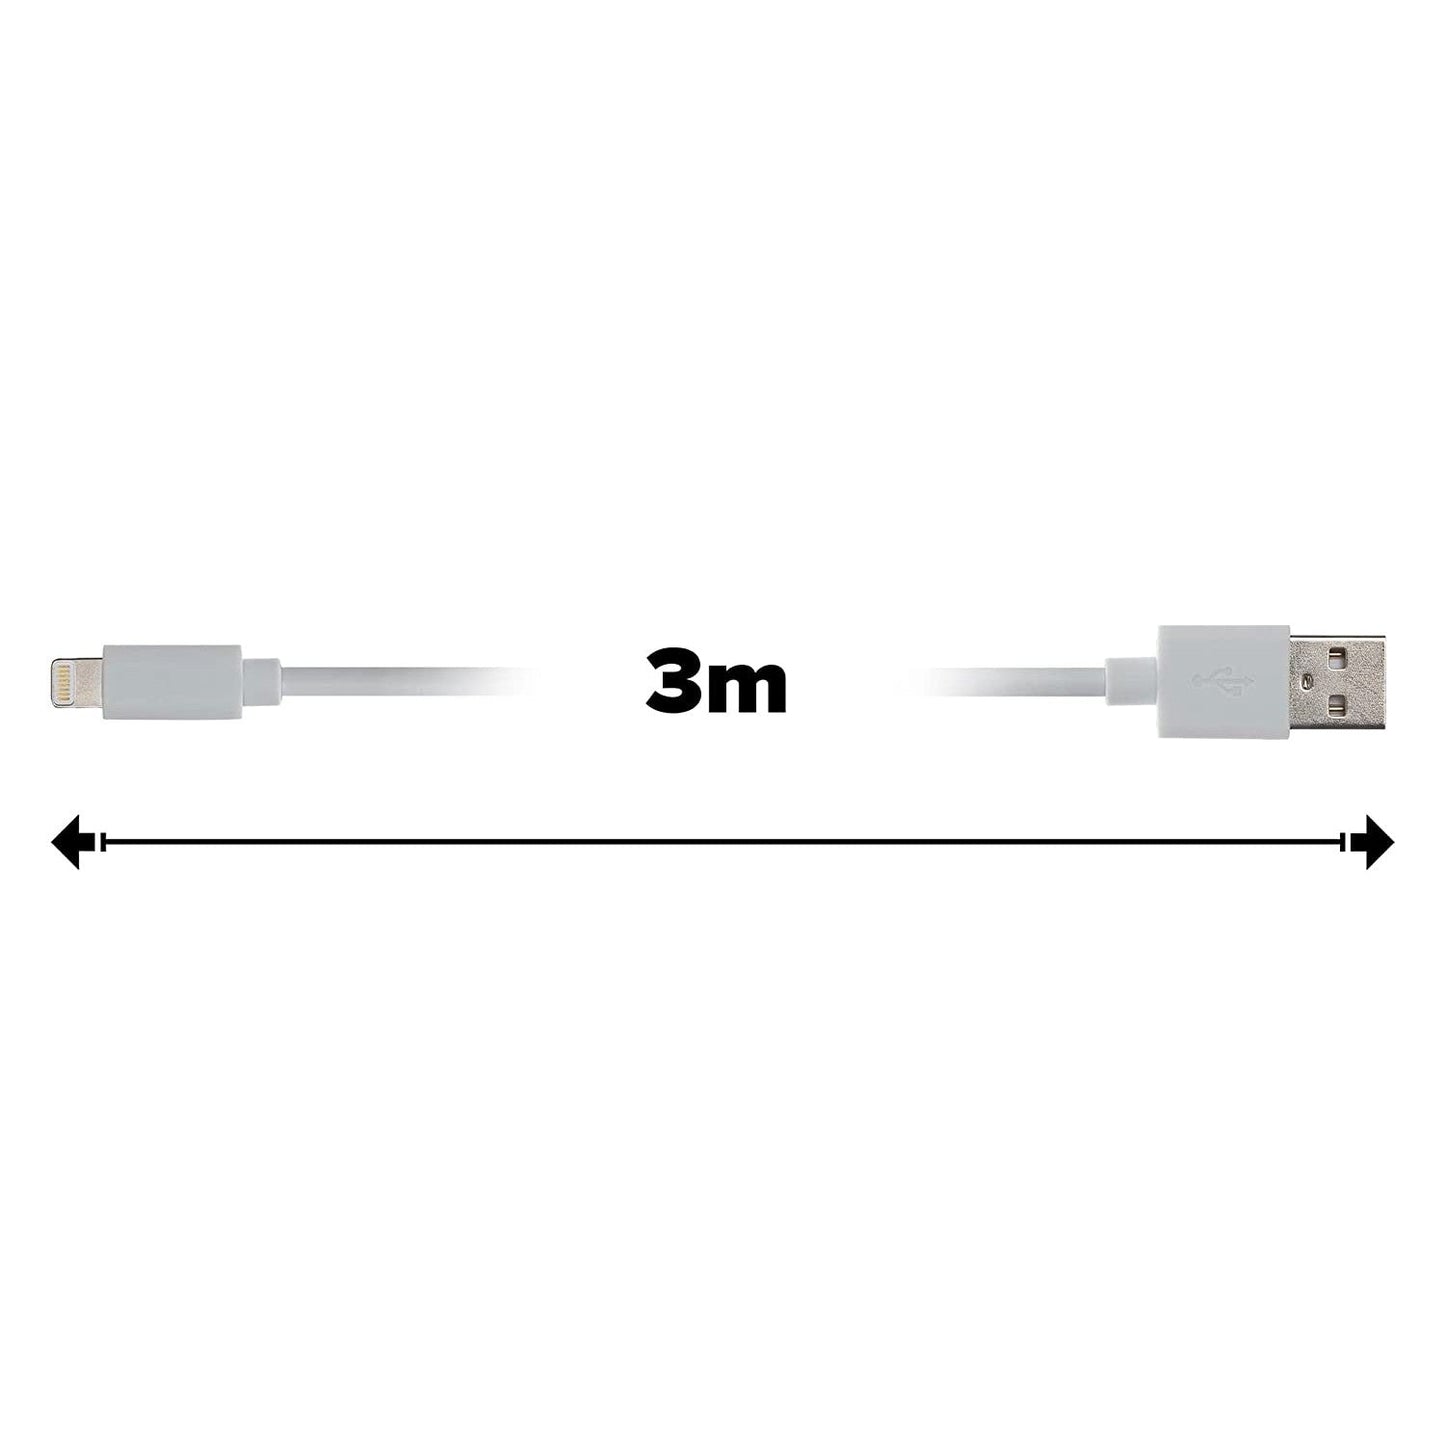 Maplin Premium Apple MFI Certified Tangle-Free Lightning to USB-A 2.0 Cable - White, 3m - maplin.co.uk